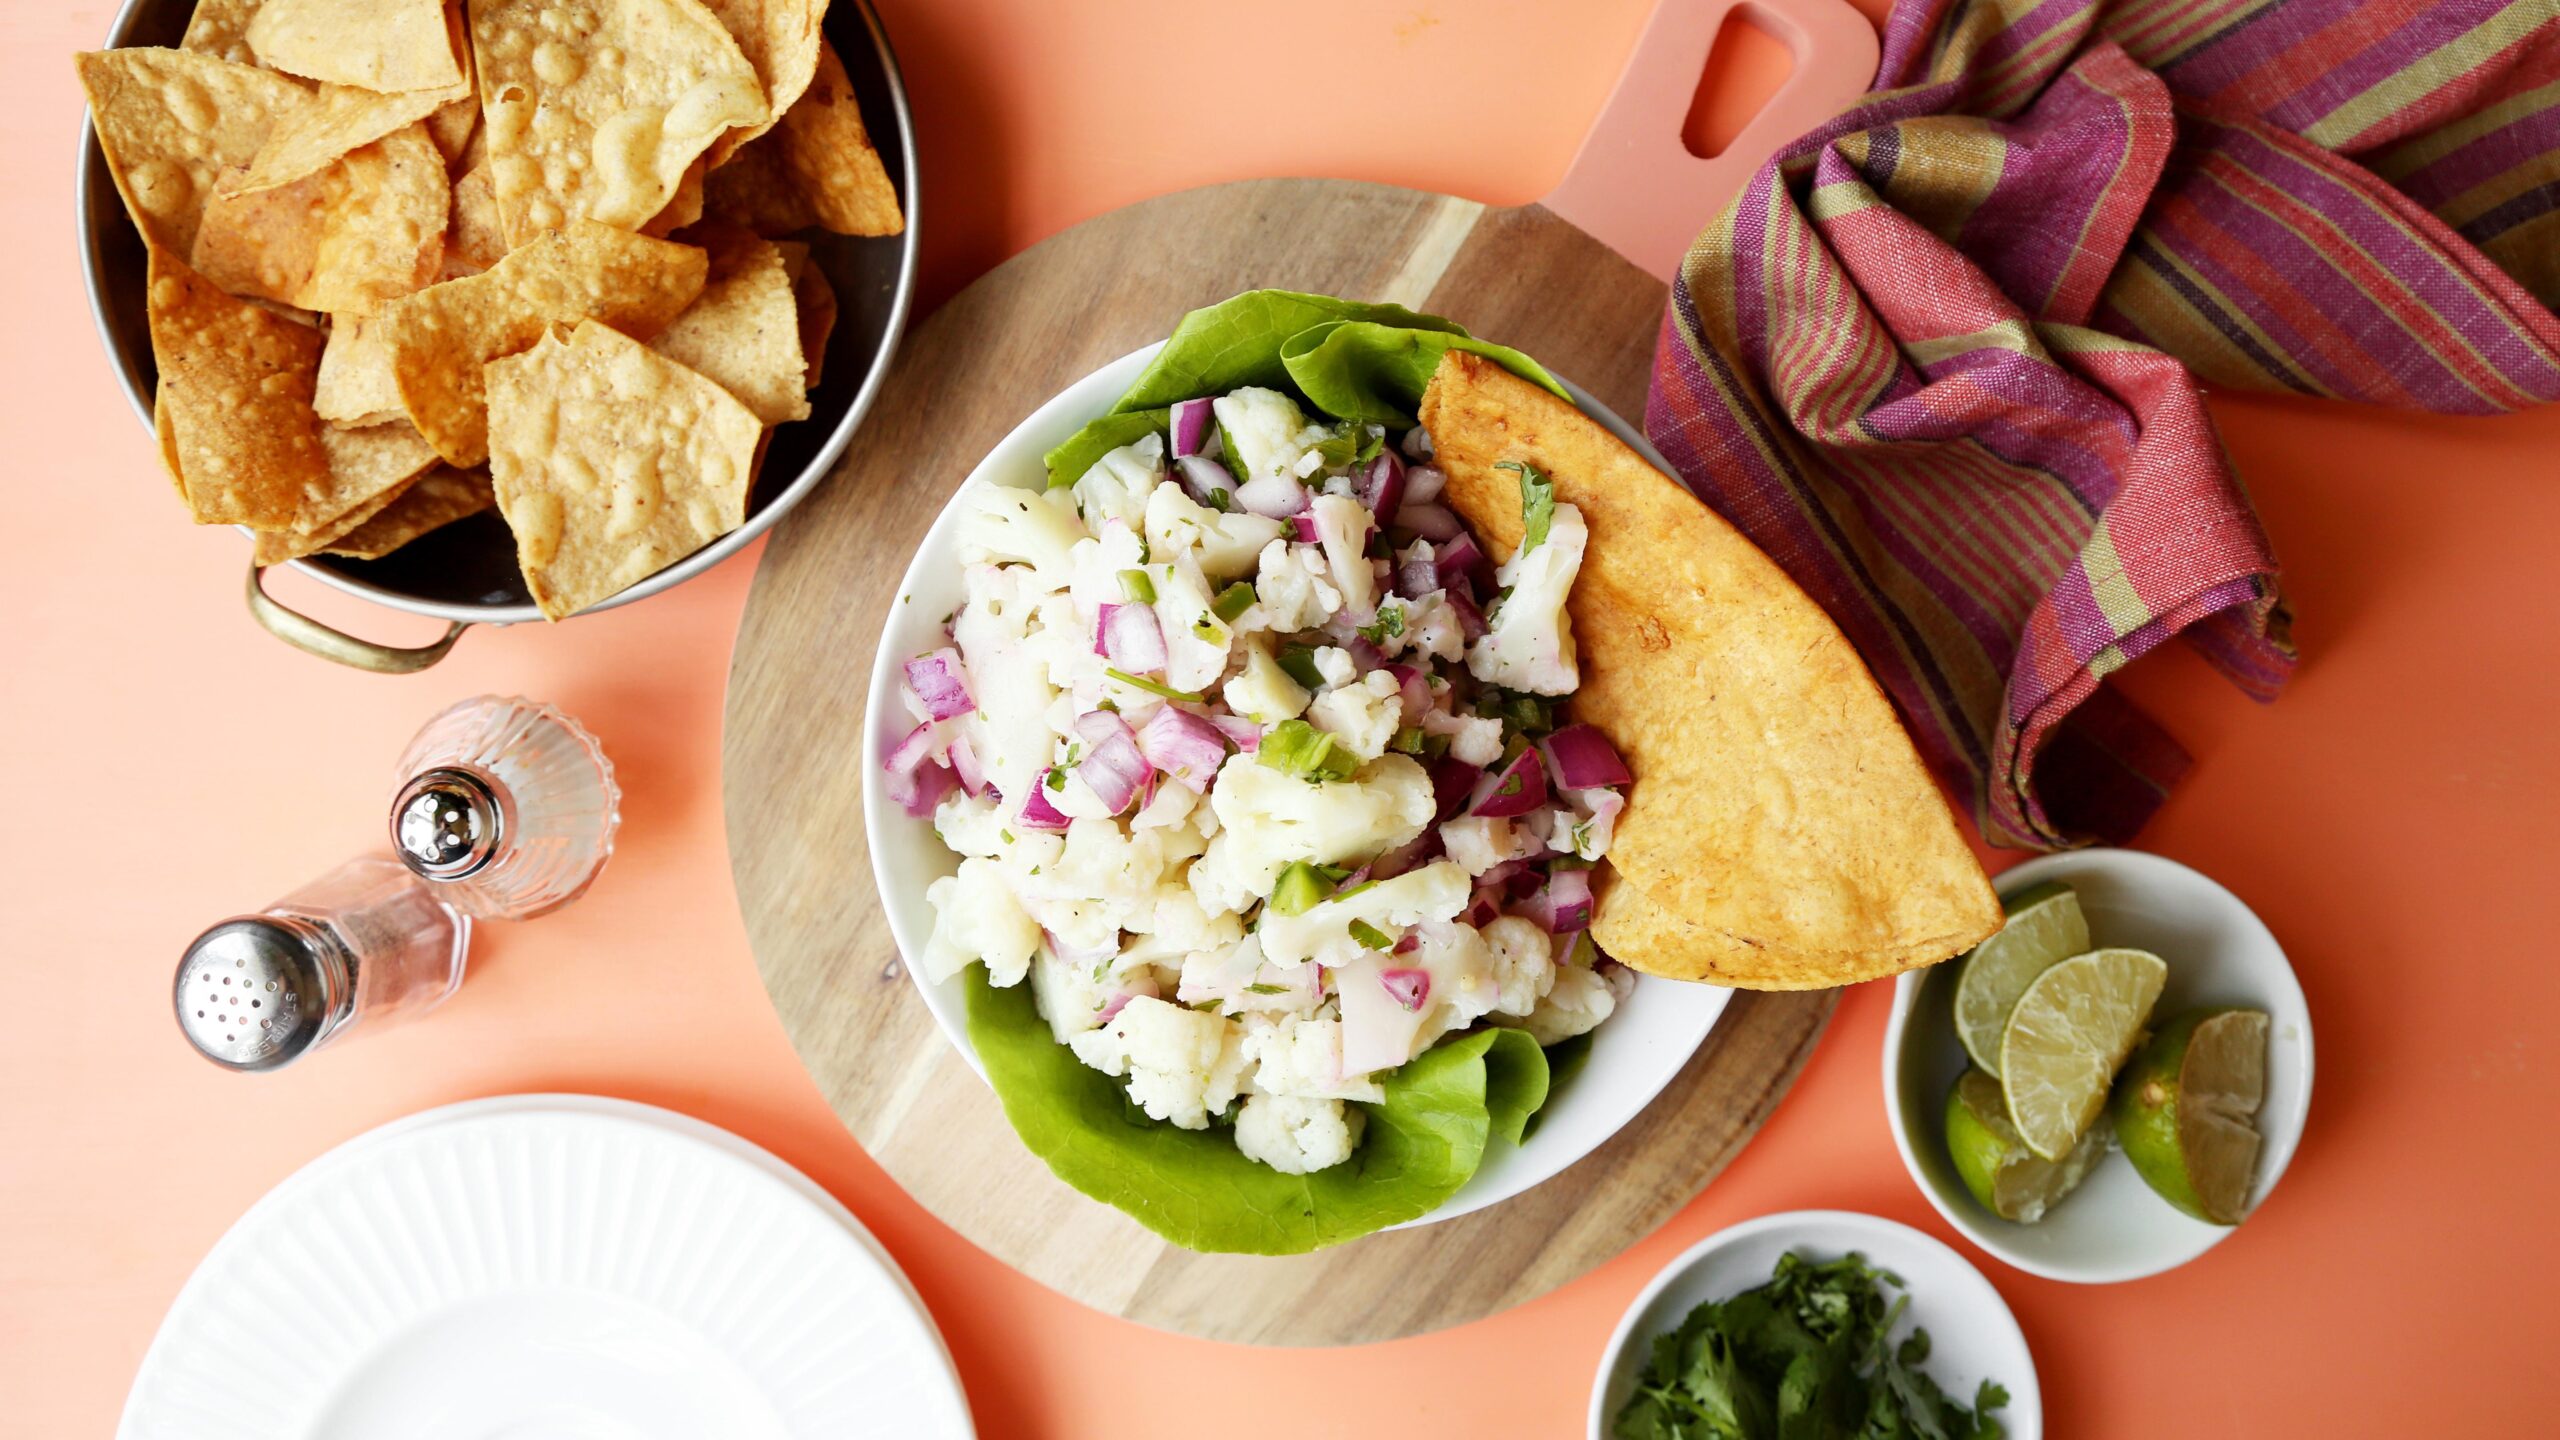  Don't be fooled by the name, this cauliflower ceviche is packed with flavor!